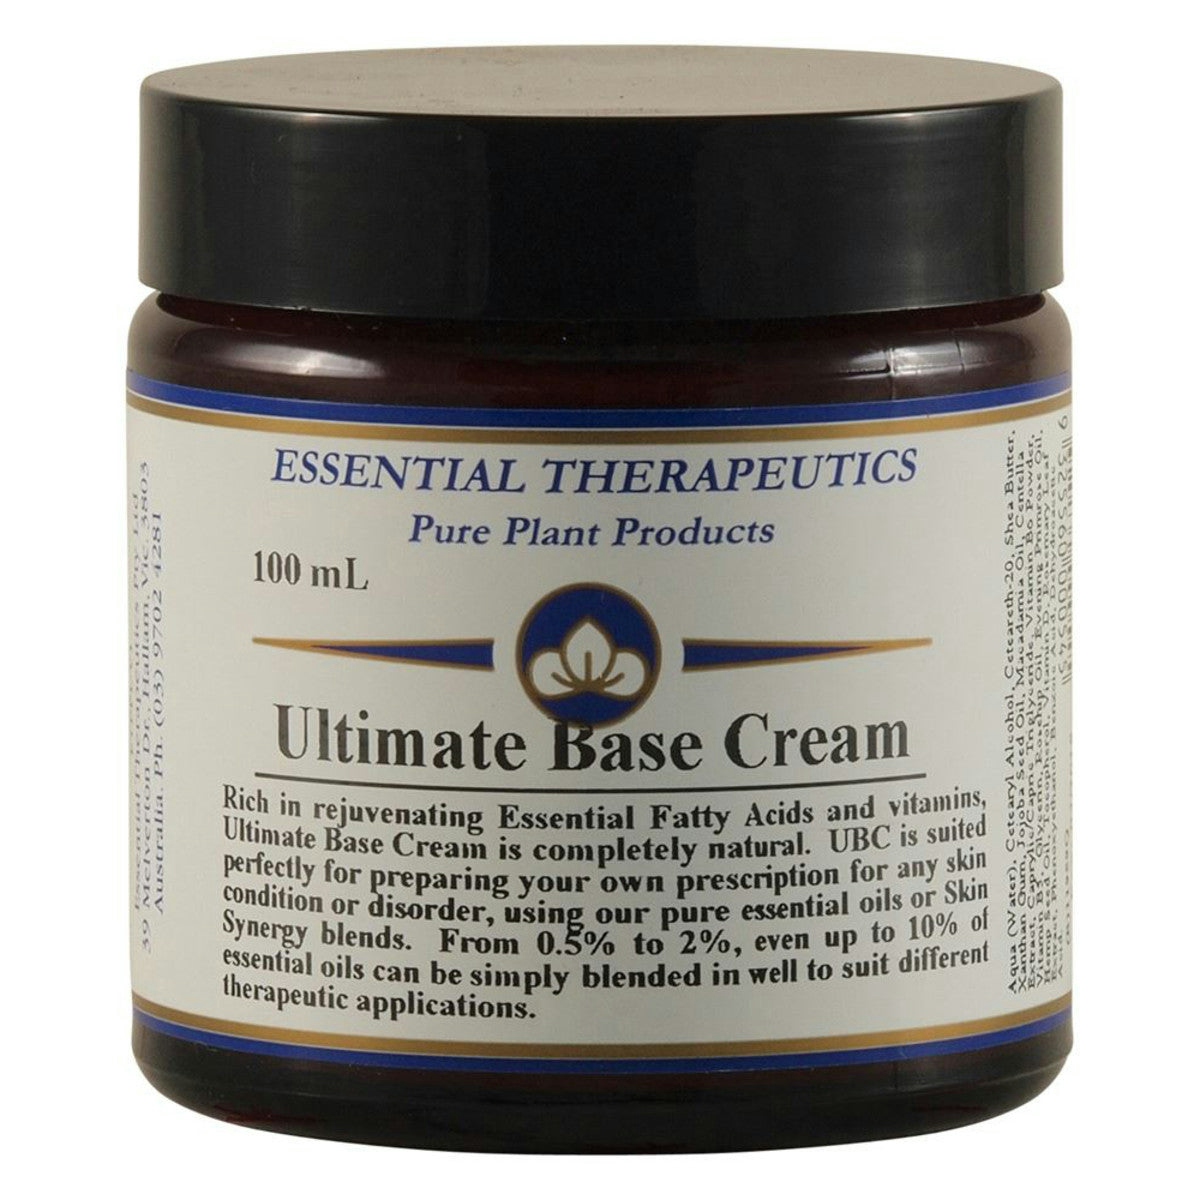 image of Essential Therapeutics Ultimate Base Cream 100ml on white background